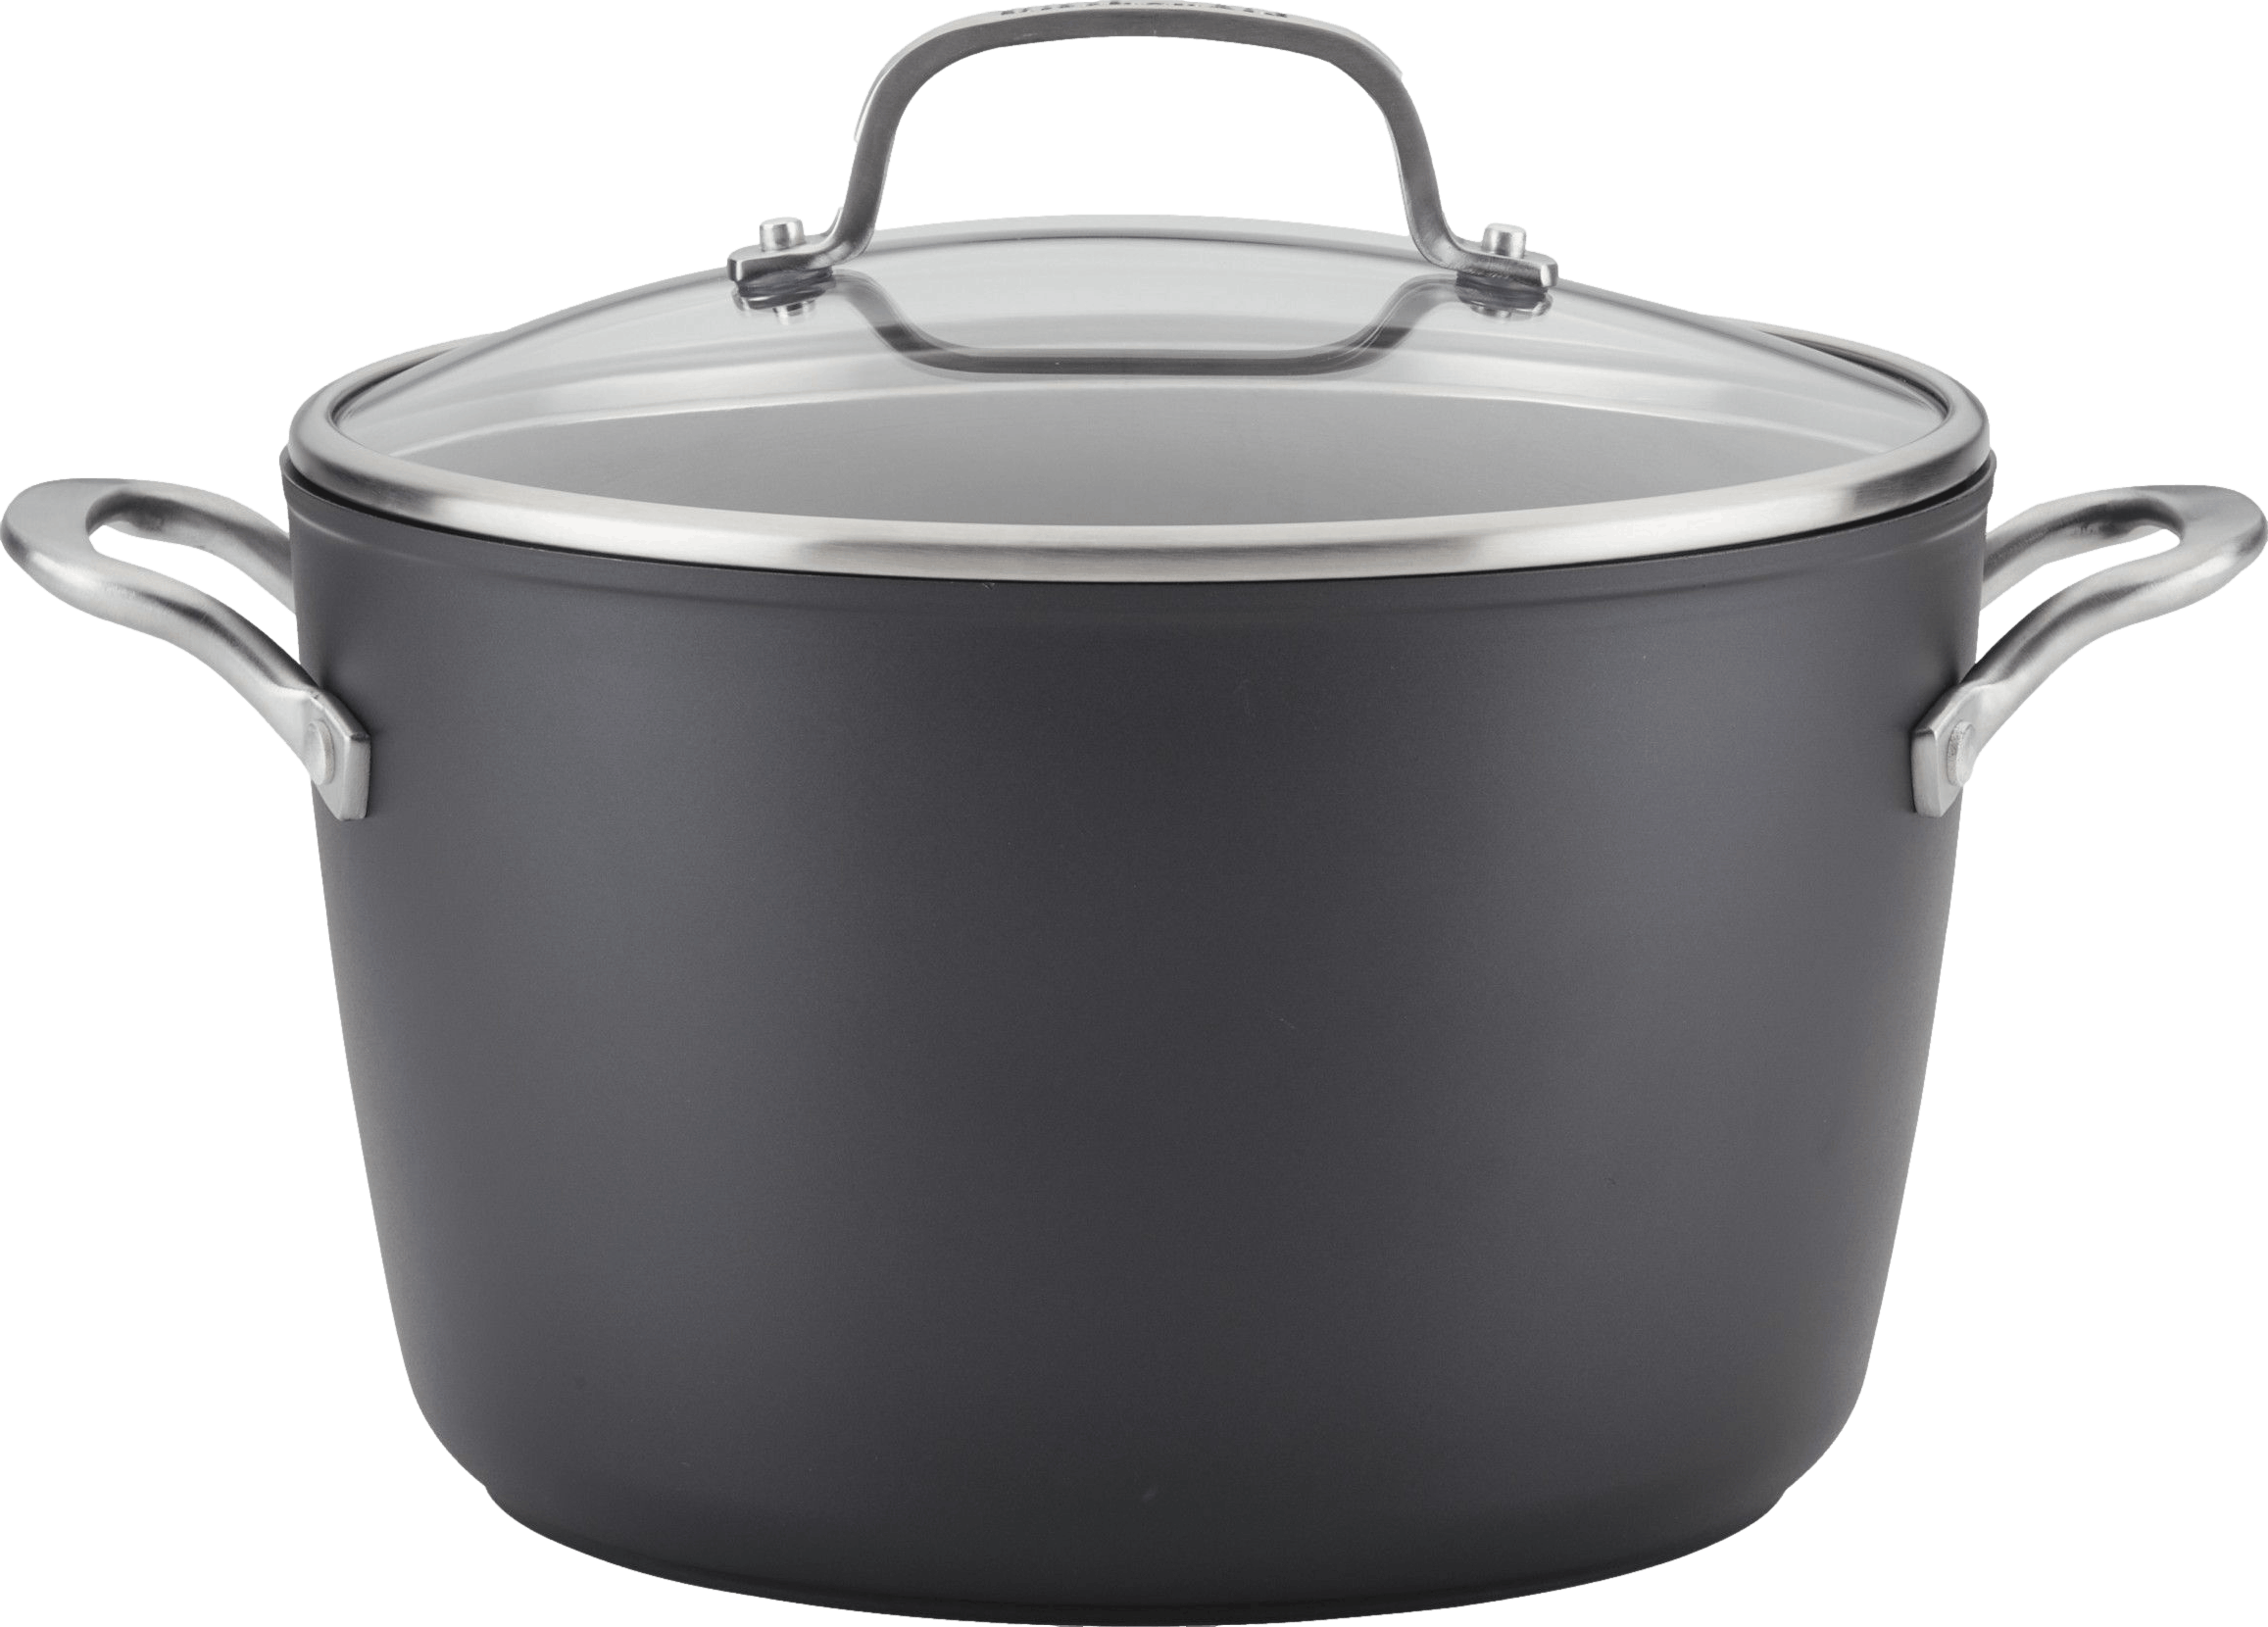 KitchenAid Stainless Steel Stockpot with Measuring Marks and Lid, 8 Quart,  Brushed Stainless Steel